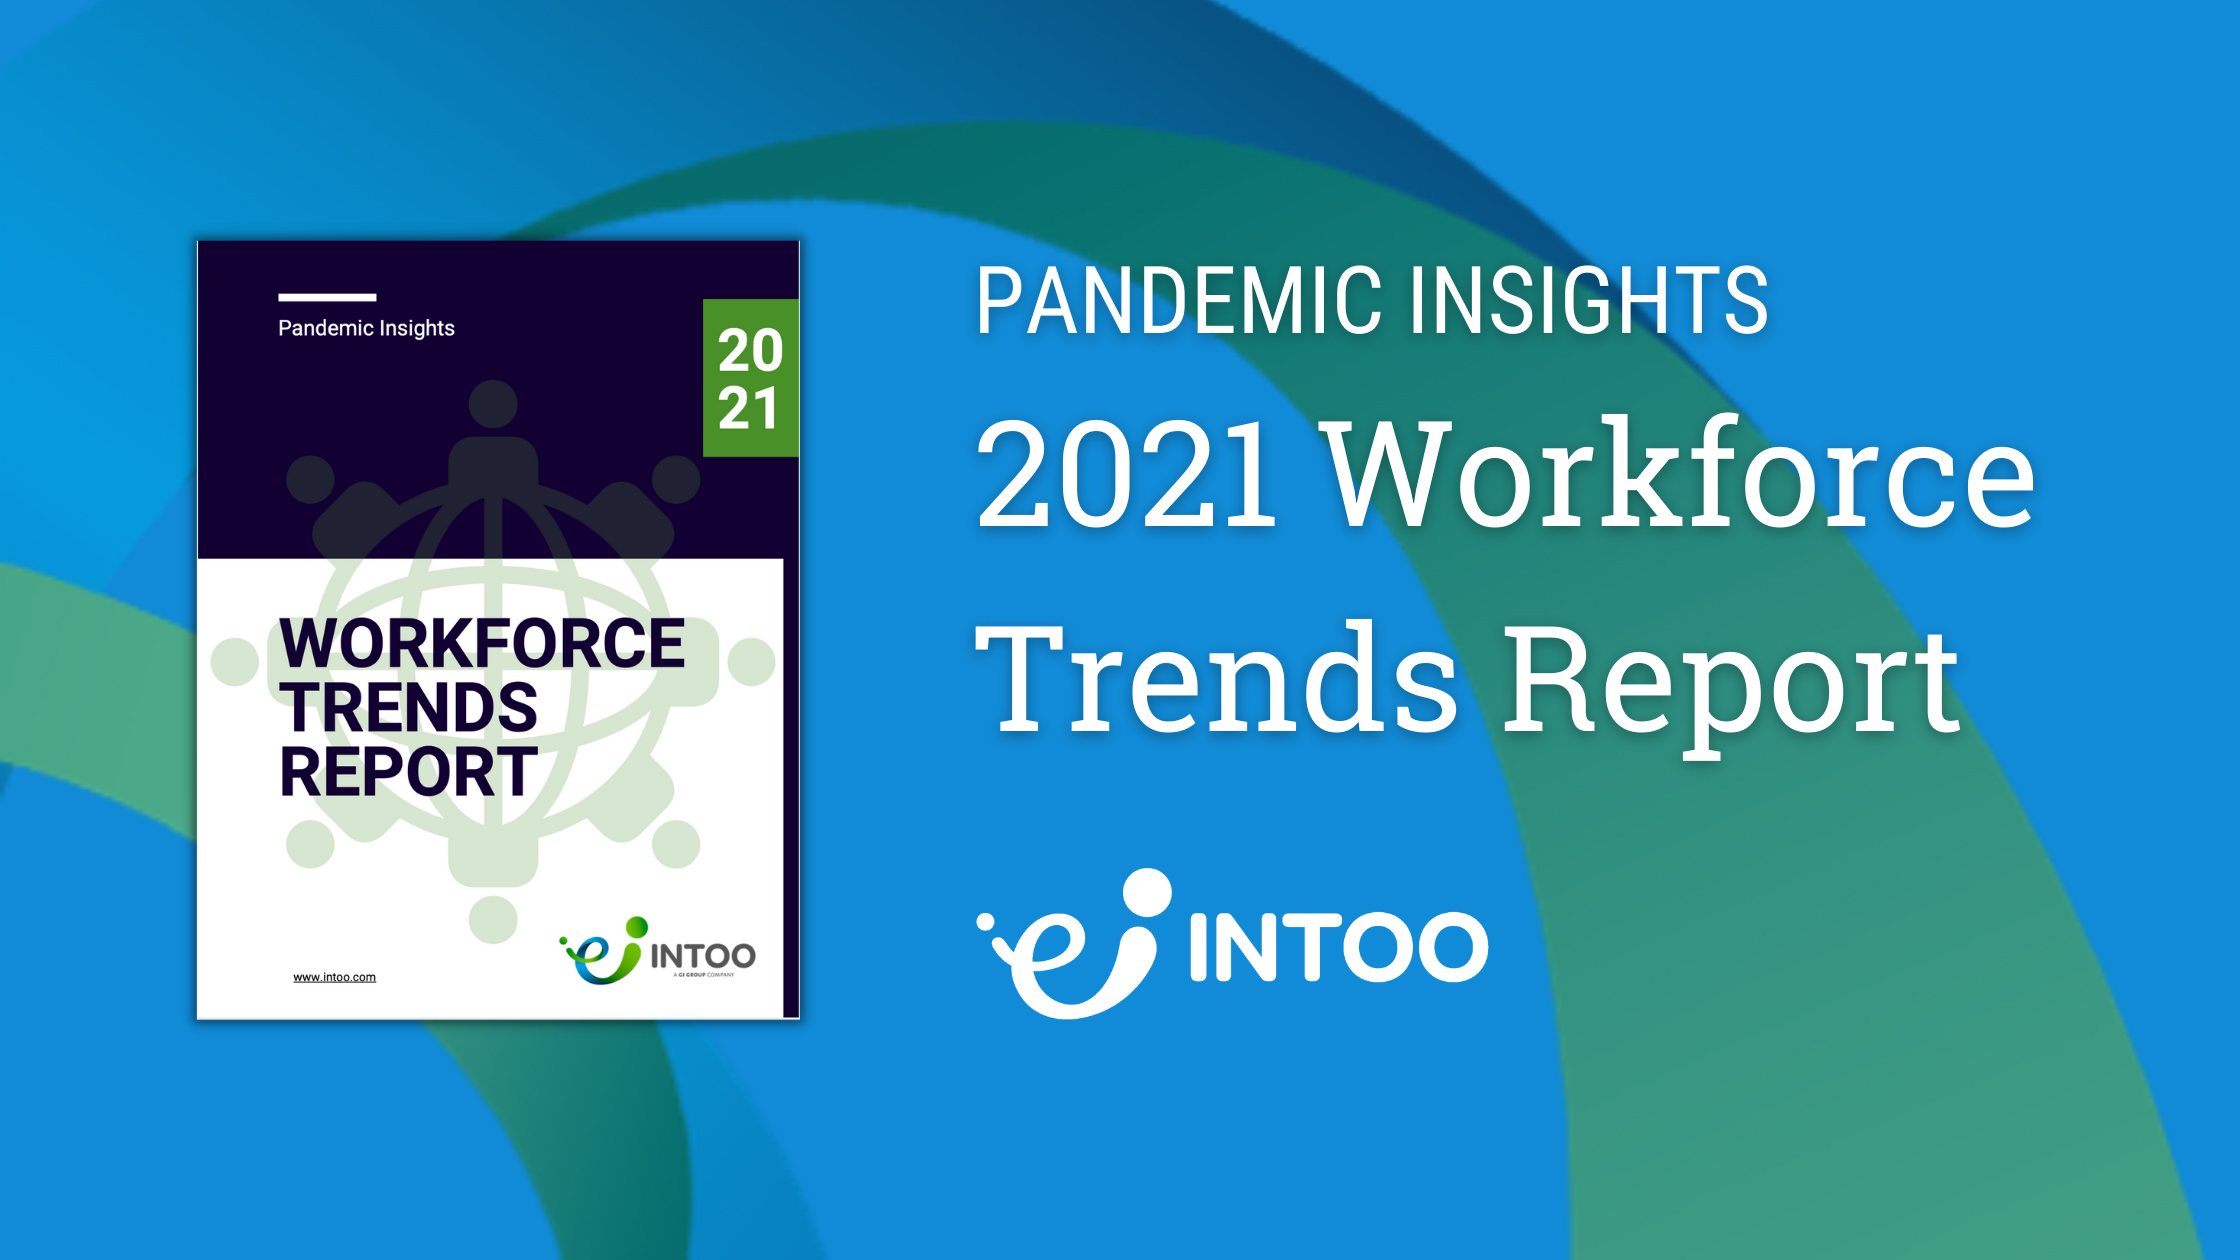 2021 Workforce Trends Report - Pandemic Insights